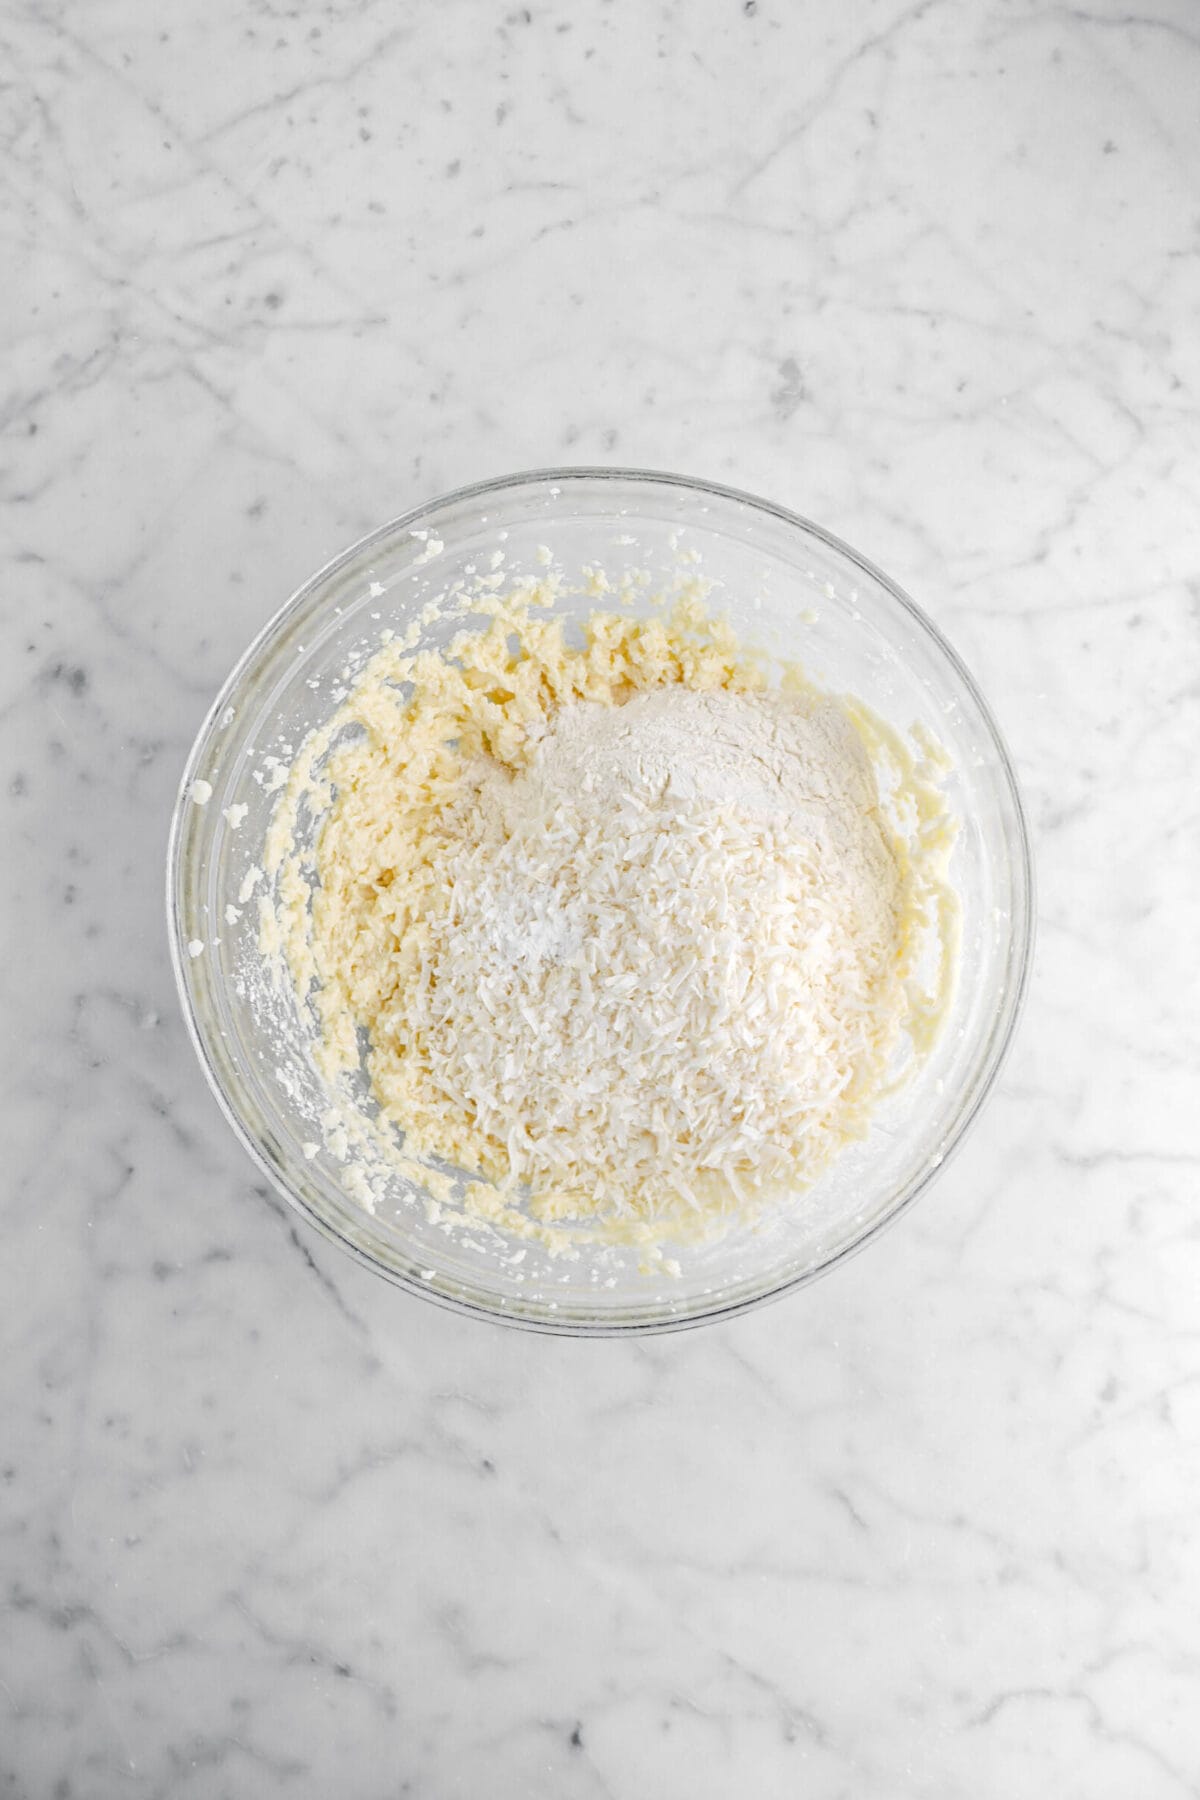 flour, shredded coconut, and baking powder added to butter mixture.